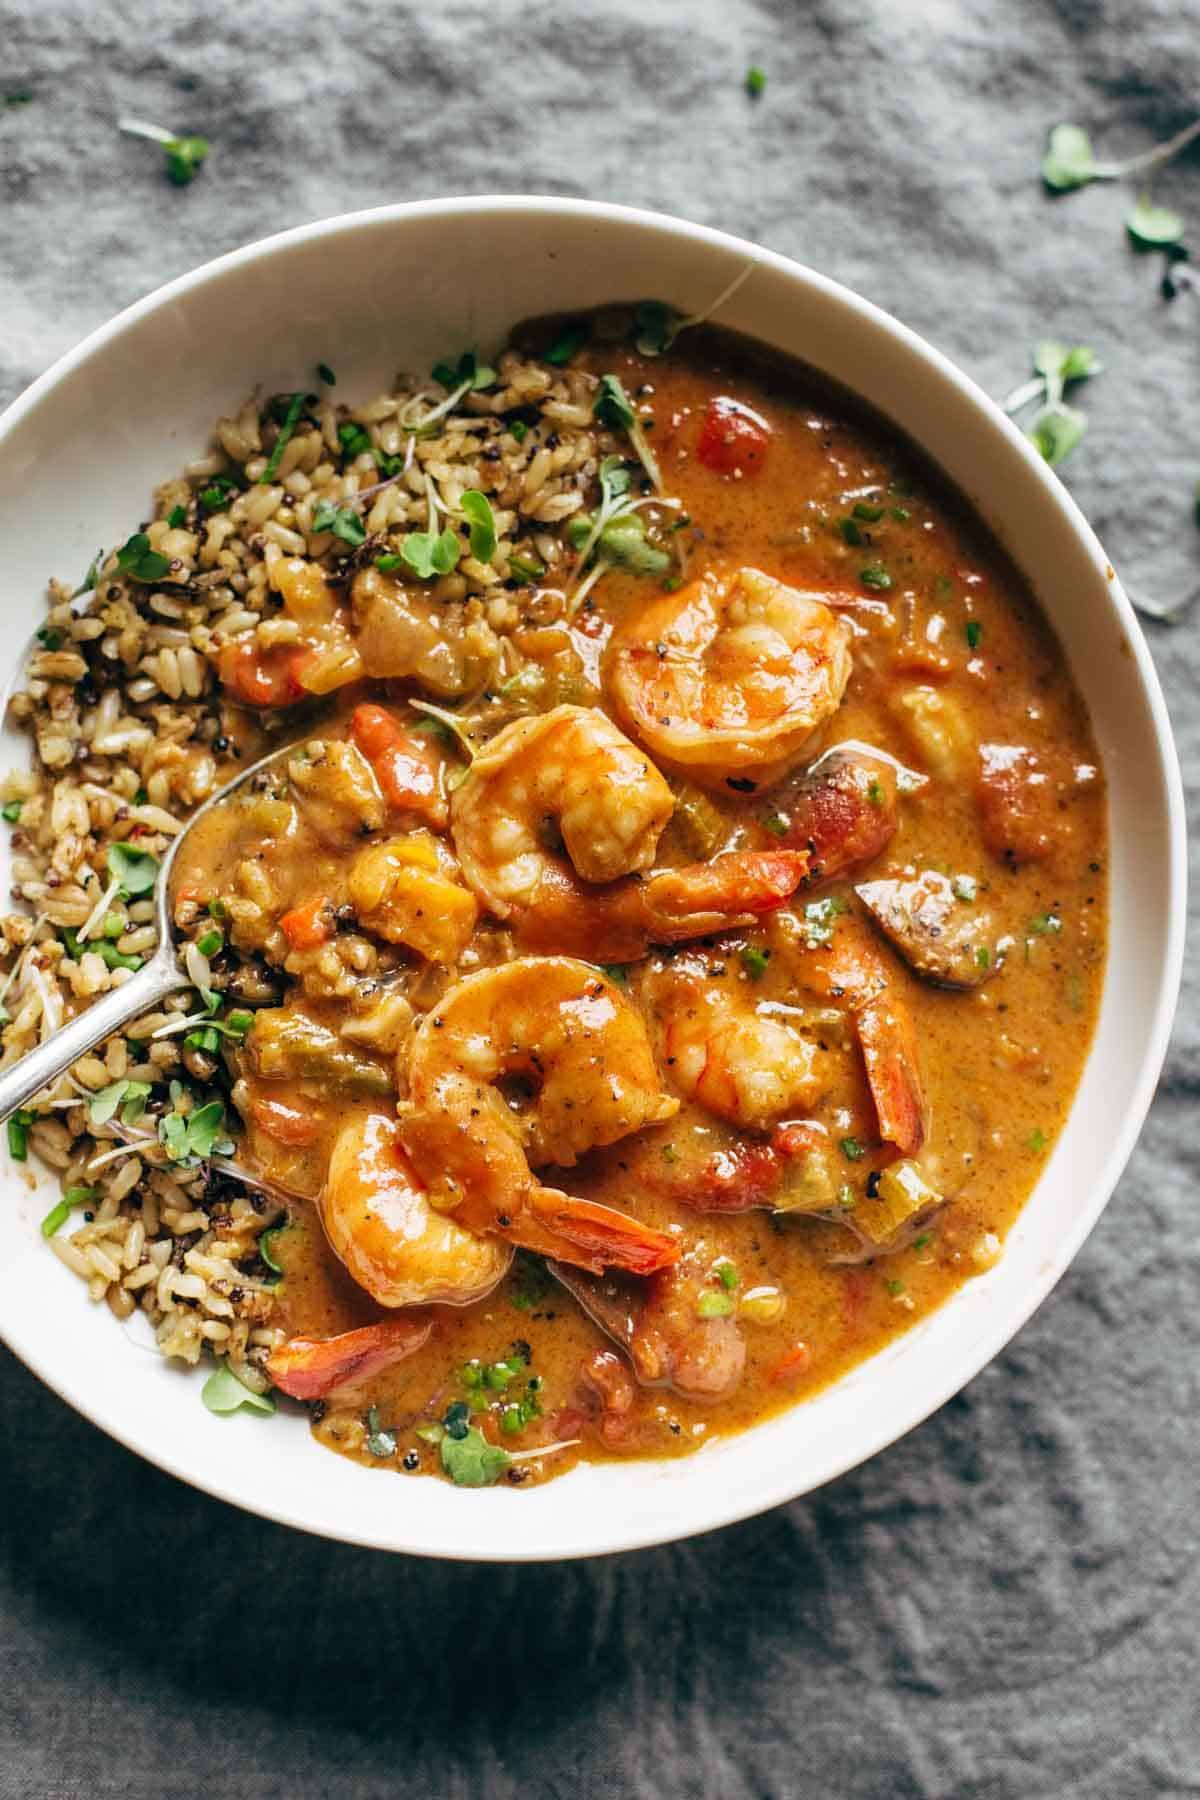 Gumbo shrimp in a bowl with rice and a spoon.